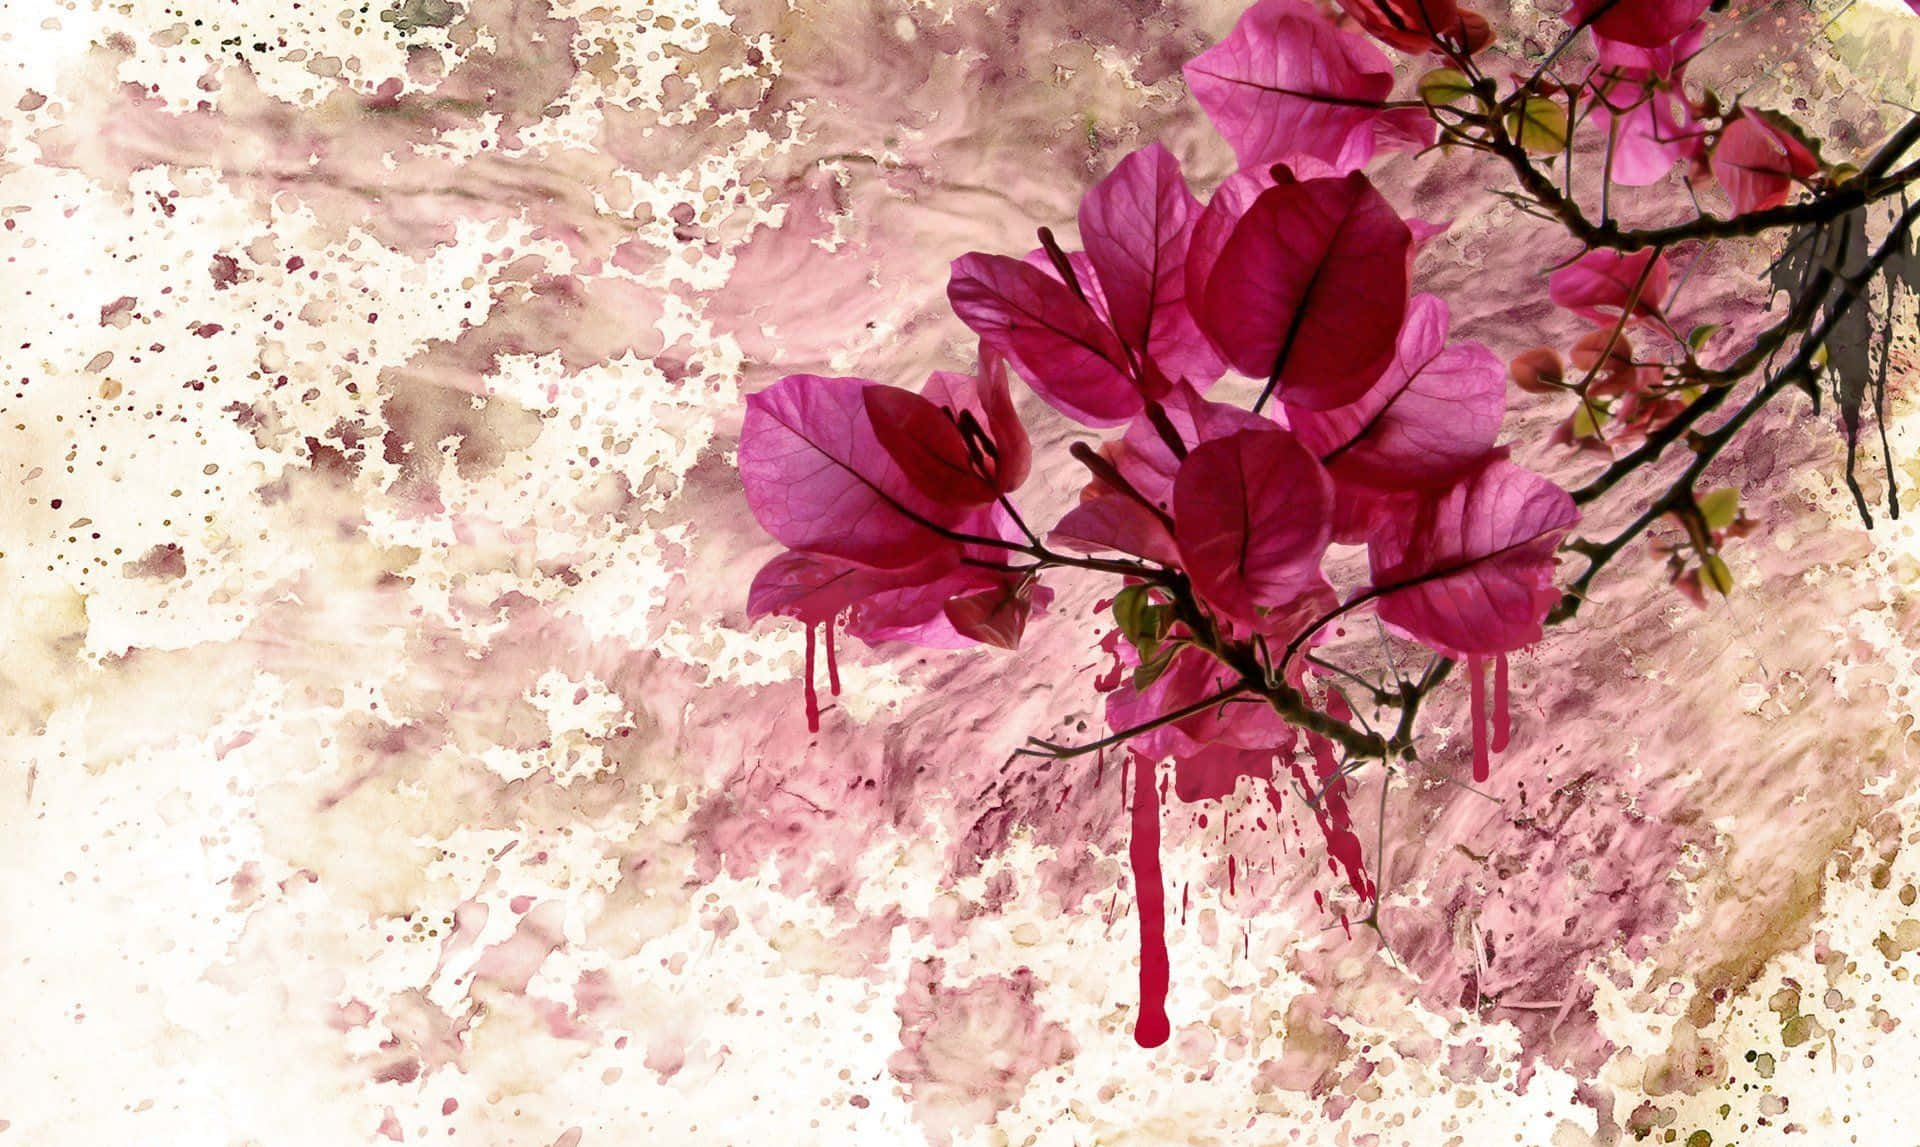 Stunning Exotic Flower Art with Splashes of Color Wallpaper